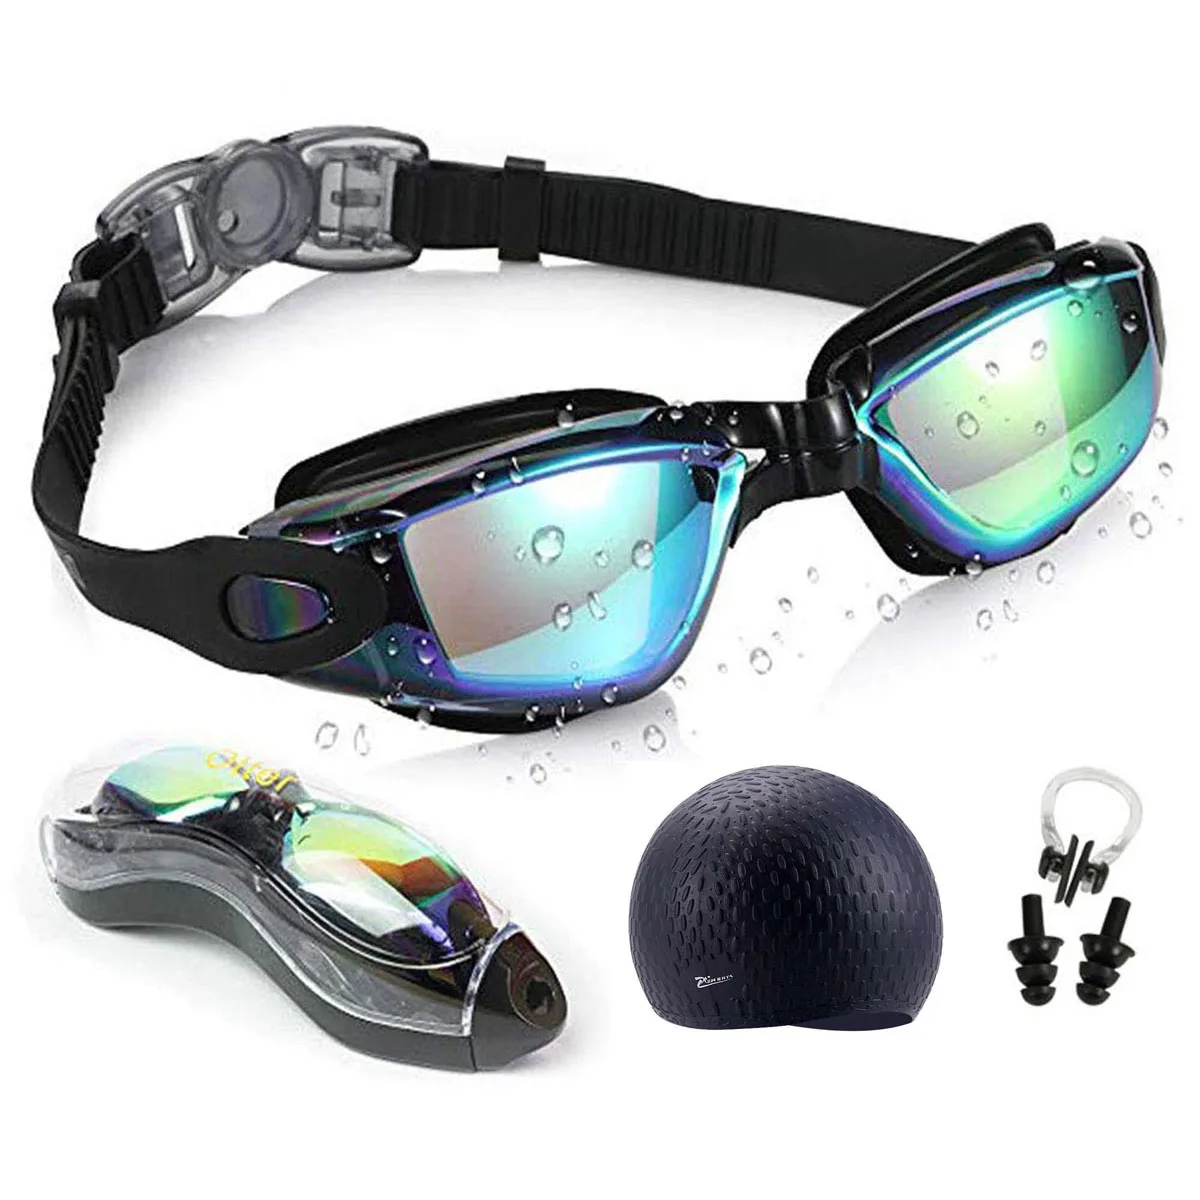 Men Swimming Glasses Anti fog UV Silicone Waterproof Swim Caps Long Hair Eyewear Swim Goggles Case Nose Earplug Diving Equipment ipl safety glasses eye protective goggles ipl 3 1 190nm 2000nm ce for laser hair removal treatment and laser cosmetolog